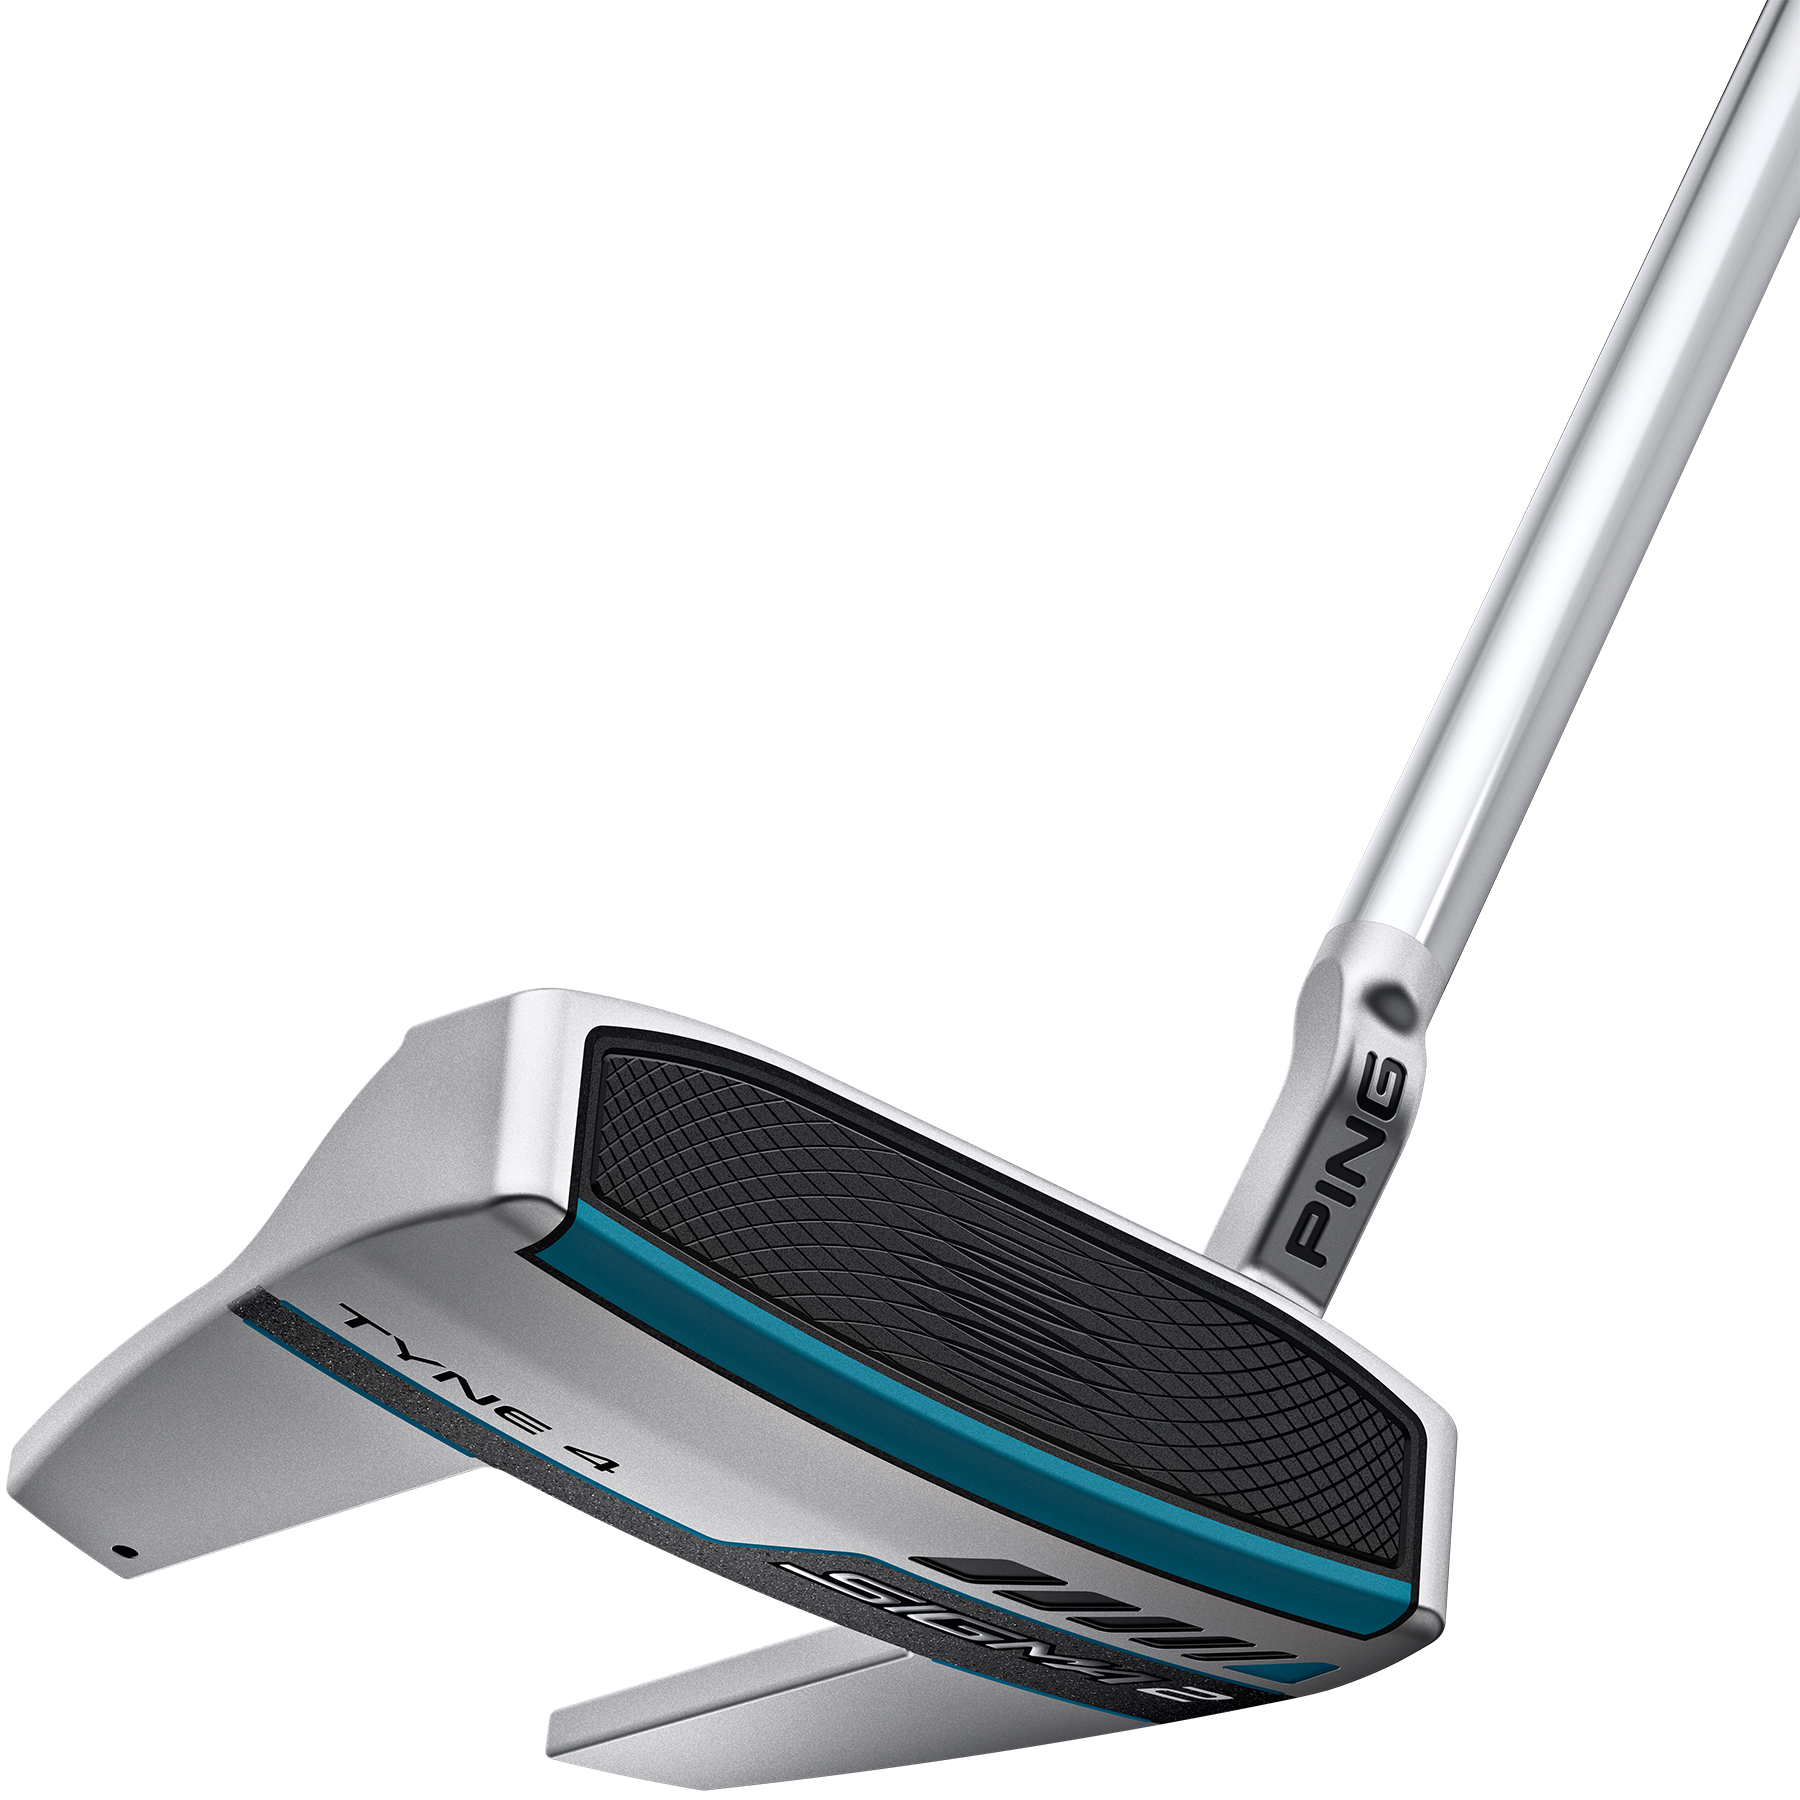 PING introduces Sigma 2 putters